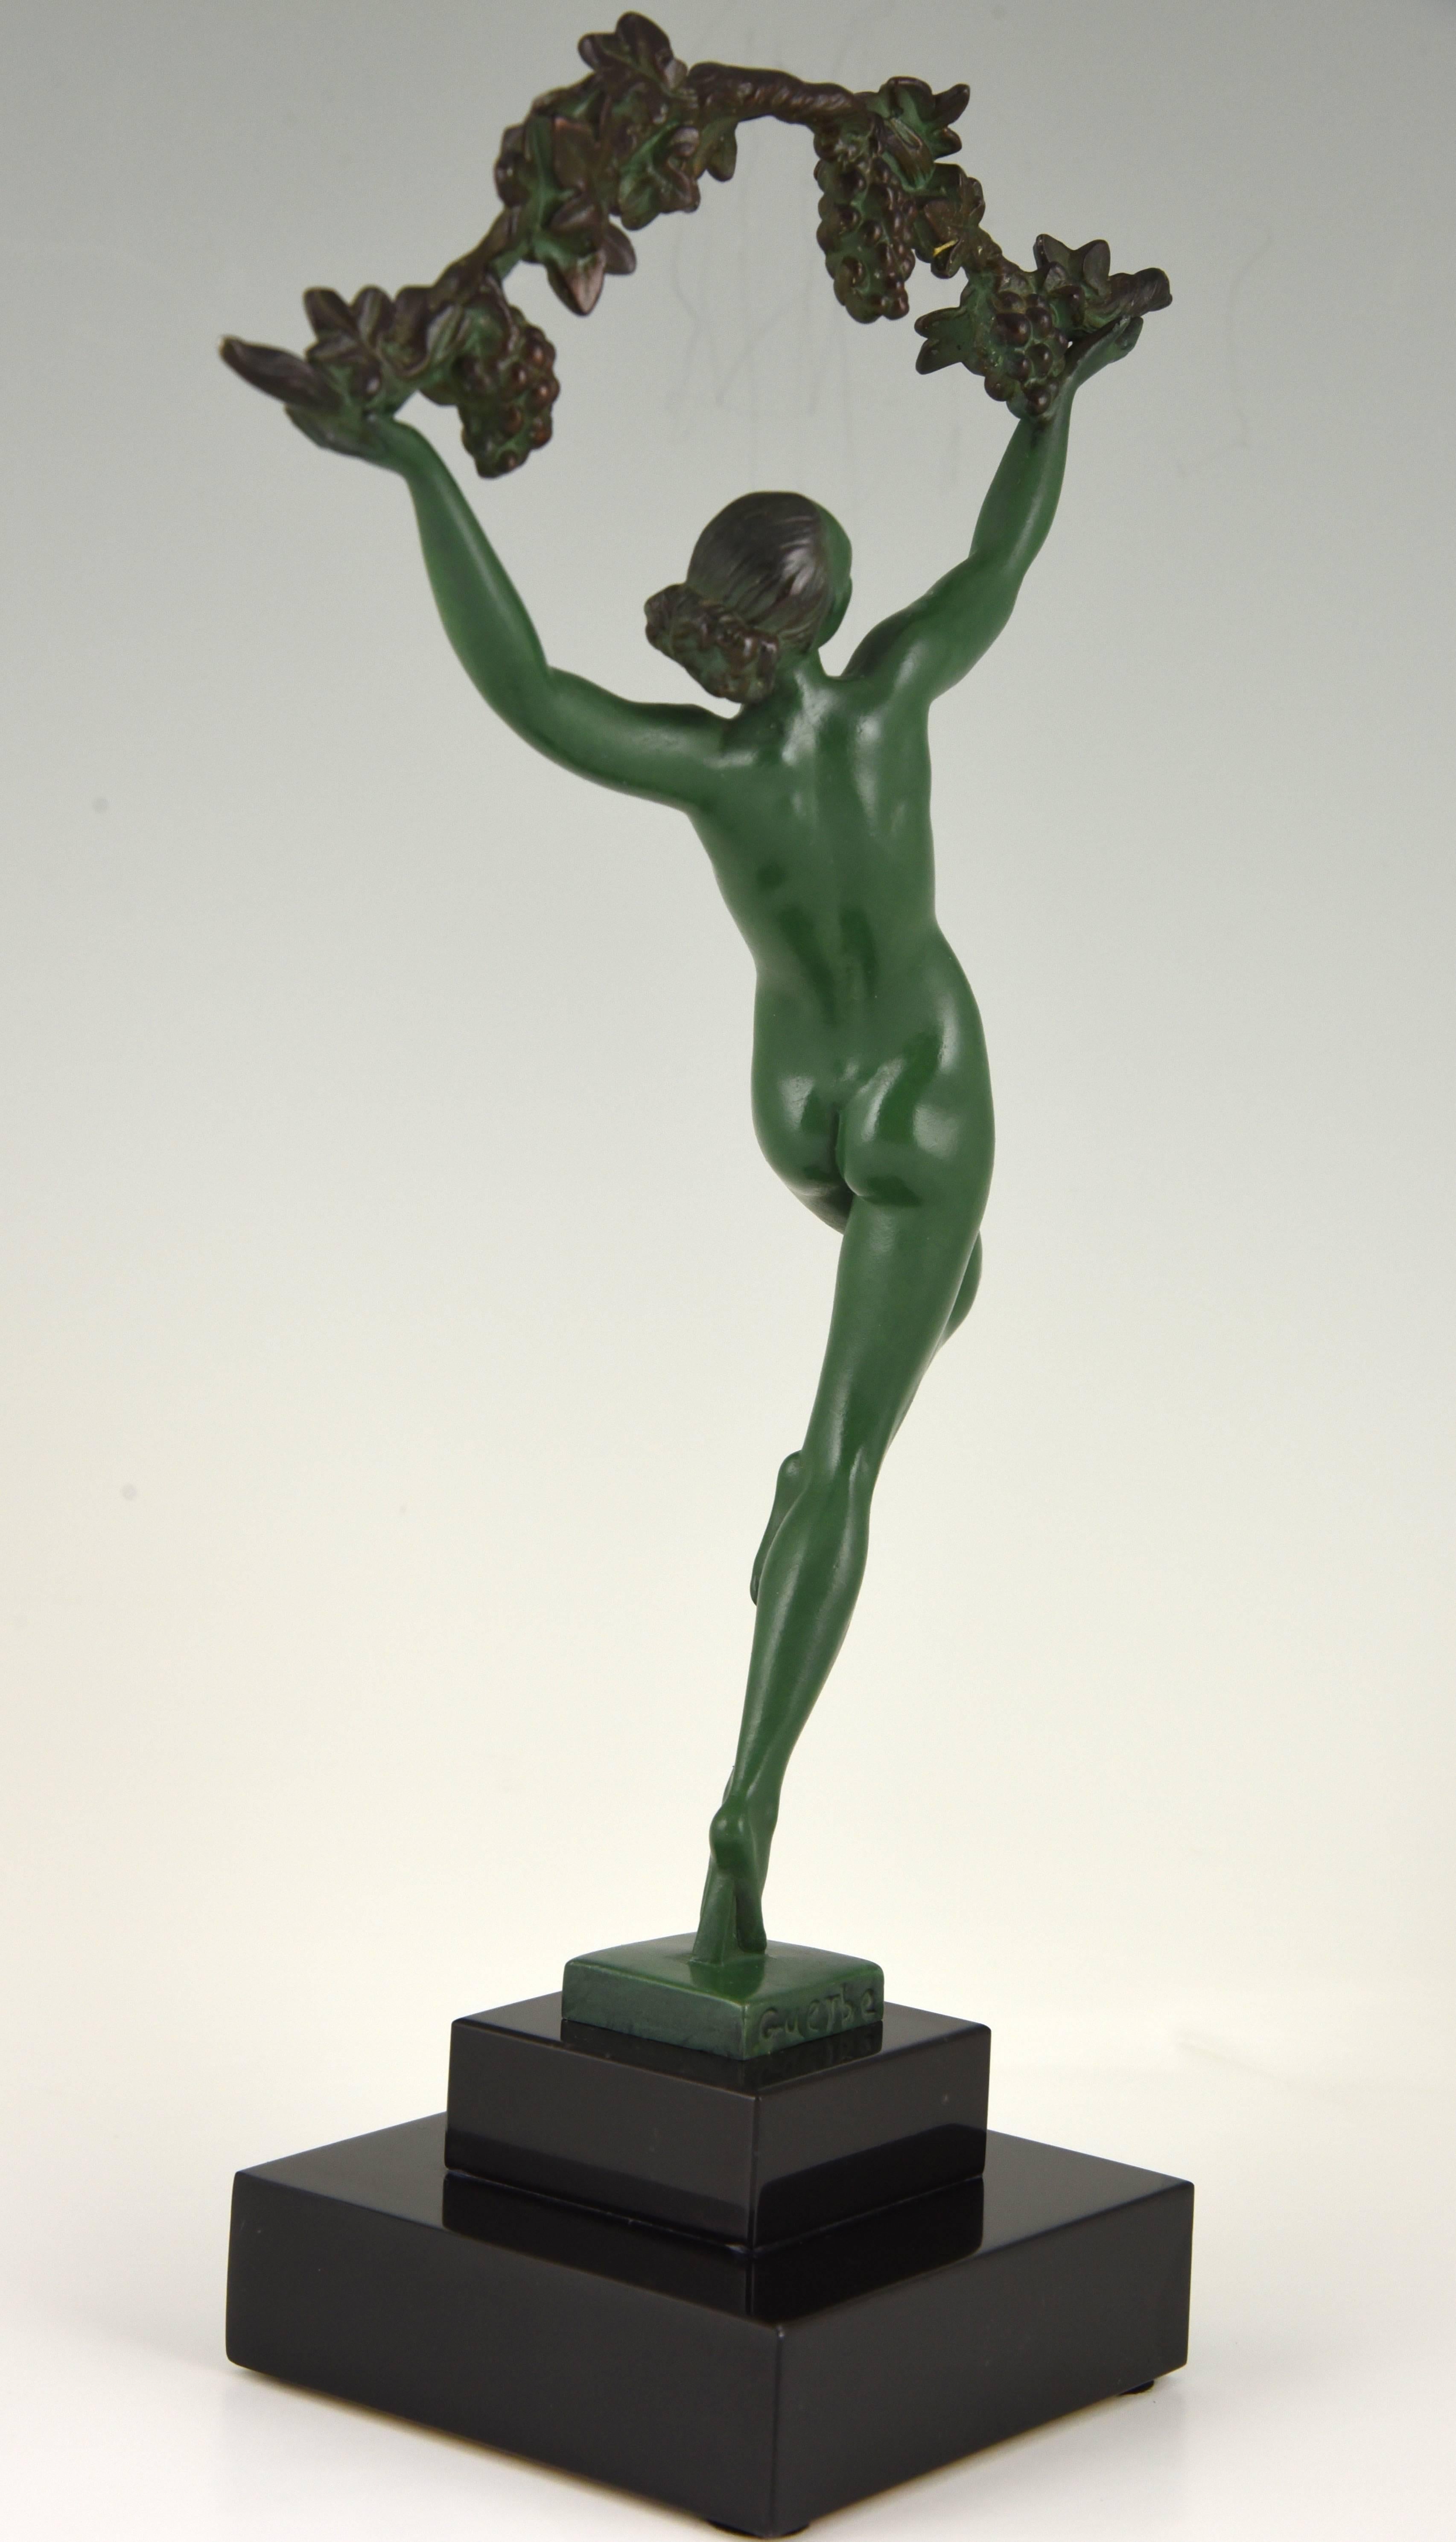 20th Century French Art Deco Sculpture of a Nude with a Branch of Grapes by Raymonde Guerbe